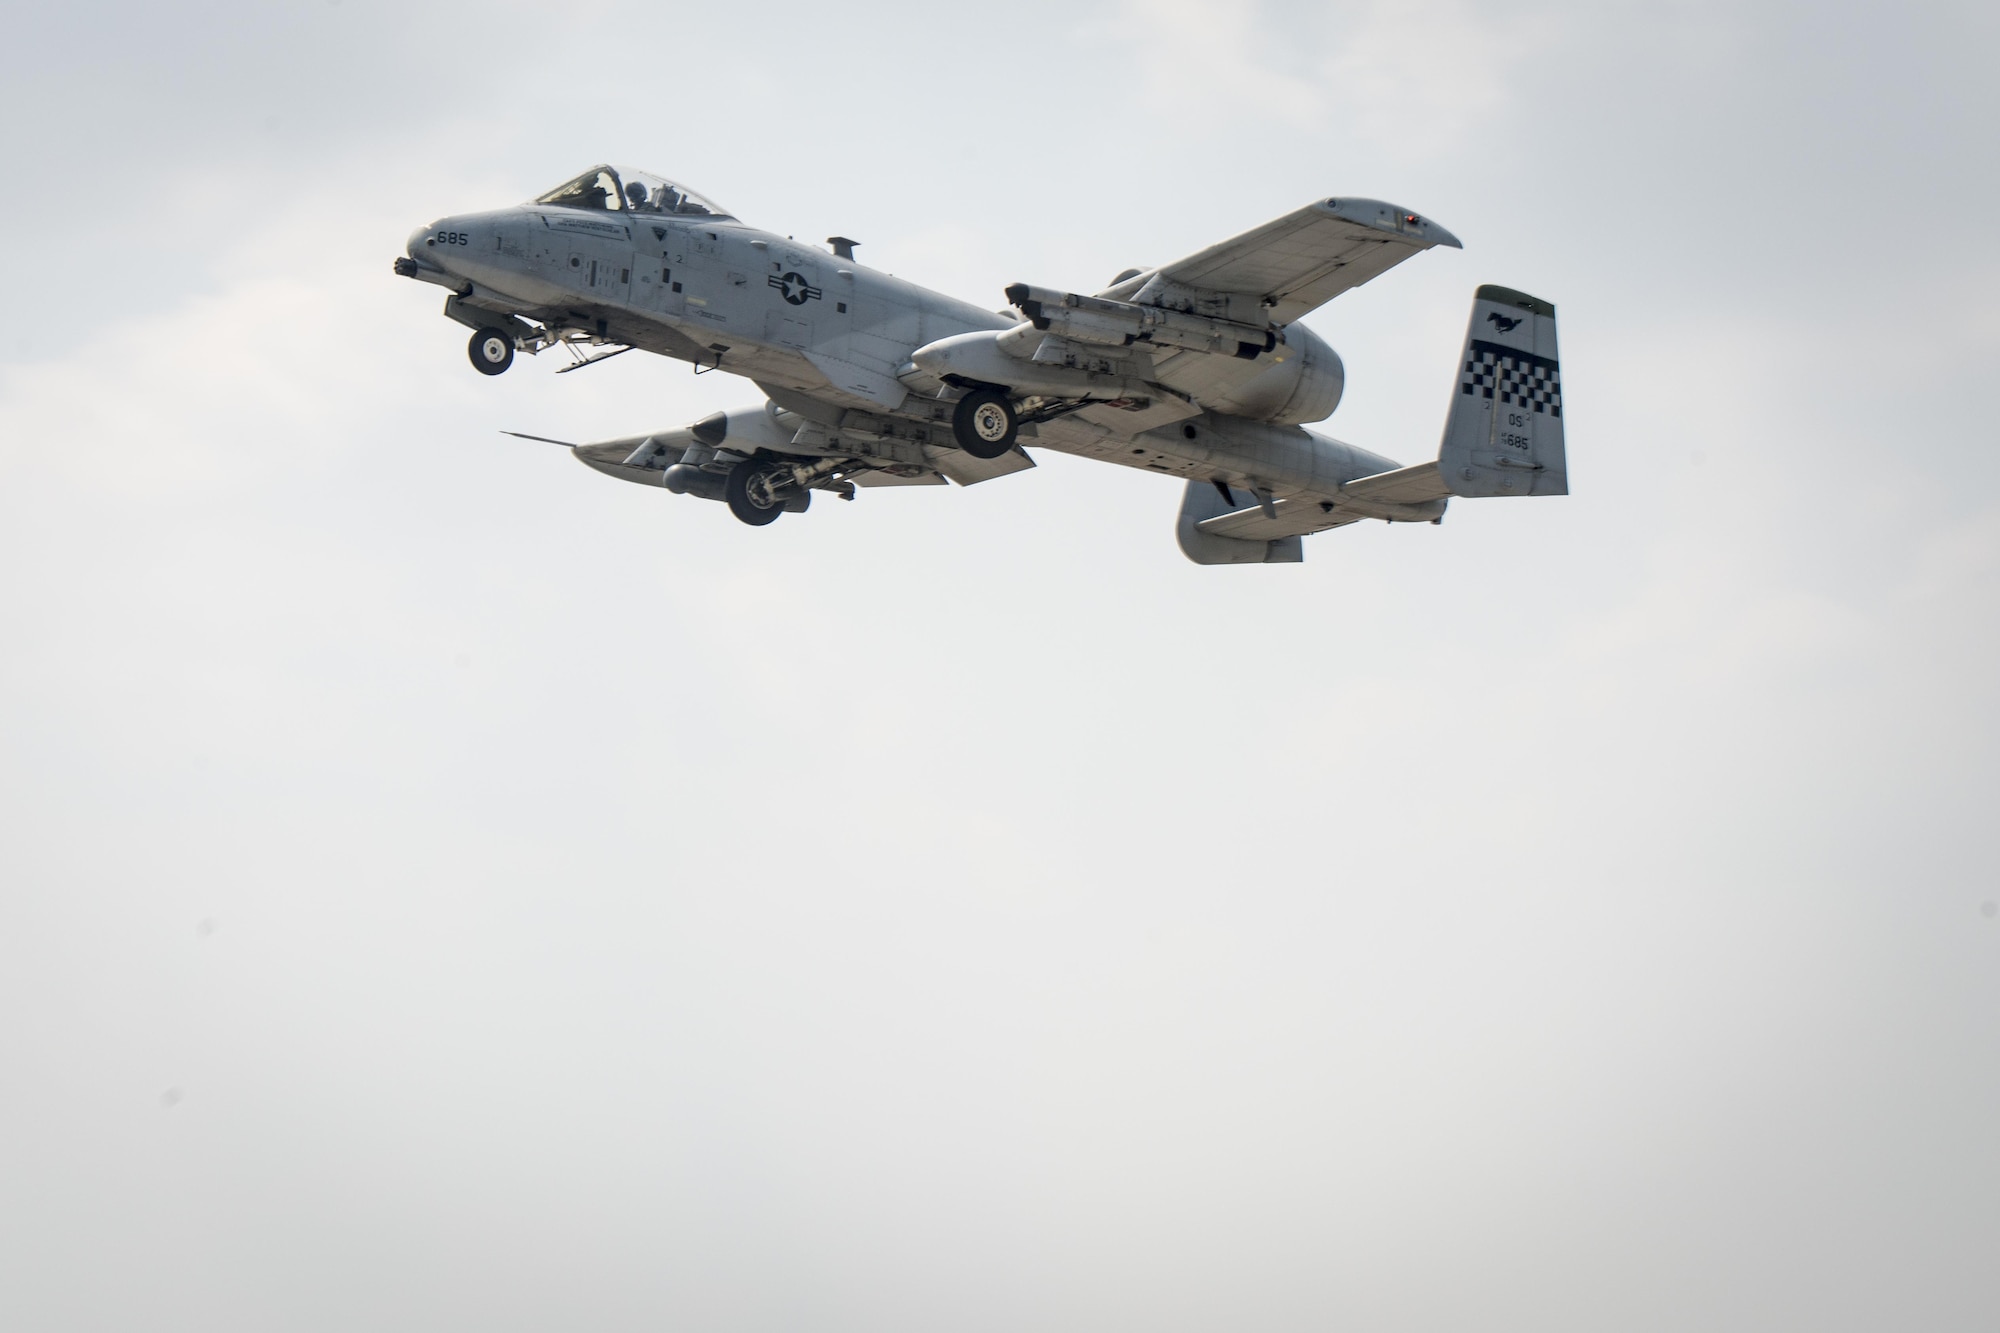 A U.S. Air Force A-10C Thunderbolt II, with the 51st Fighter Wing, Osan Air Base, Republic of Korea, takes off from Clark Air Base, Philippines, April 28, 2016. The A-10Cs flew their last U.S. Pacific Command Air Contingent mission as this iteration comes to a close. The Air Contingent, stood up at the invitation of the Philippine government, is capable of conducting operations ranging from air and maritime domain awareness, personnel recovery, combating piracy, and assuring that all nations have access to the regional air and maritime domains in accordance with international law. (U.S. Air Force photo by Staff Sgt. Benjamin W. Stratton)